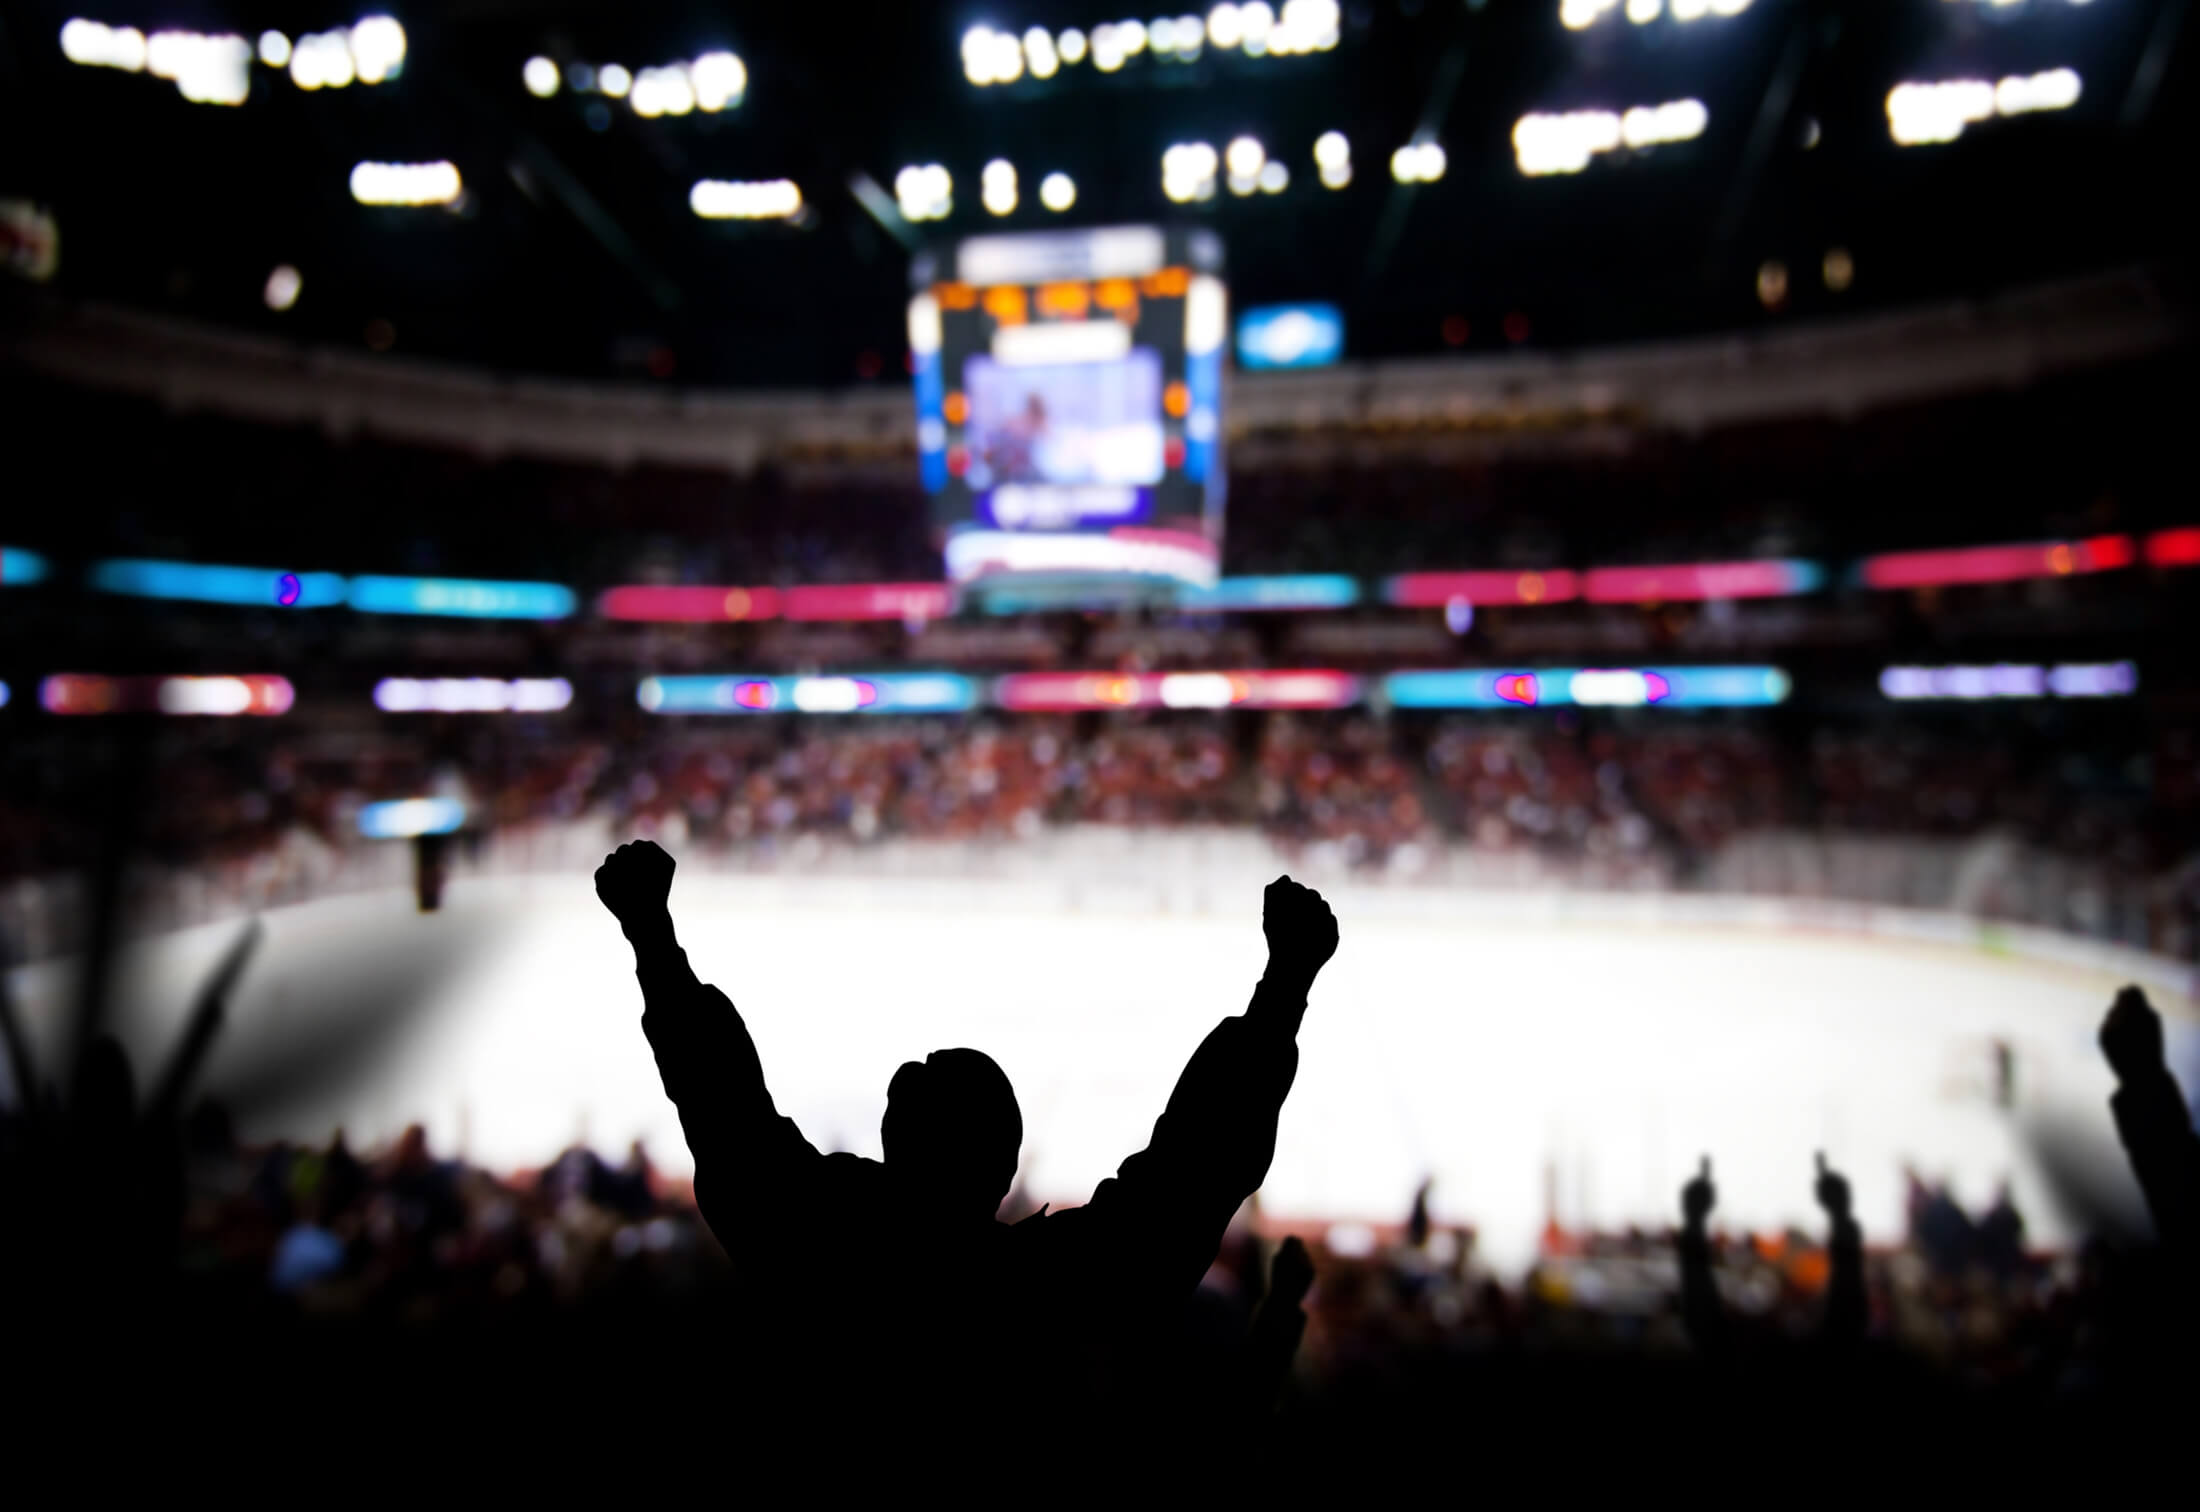 A fan cheering at a hockey game.